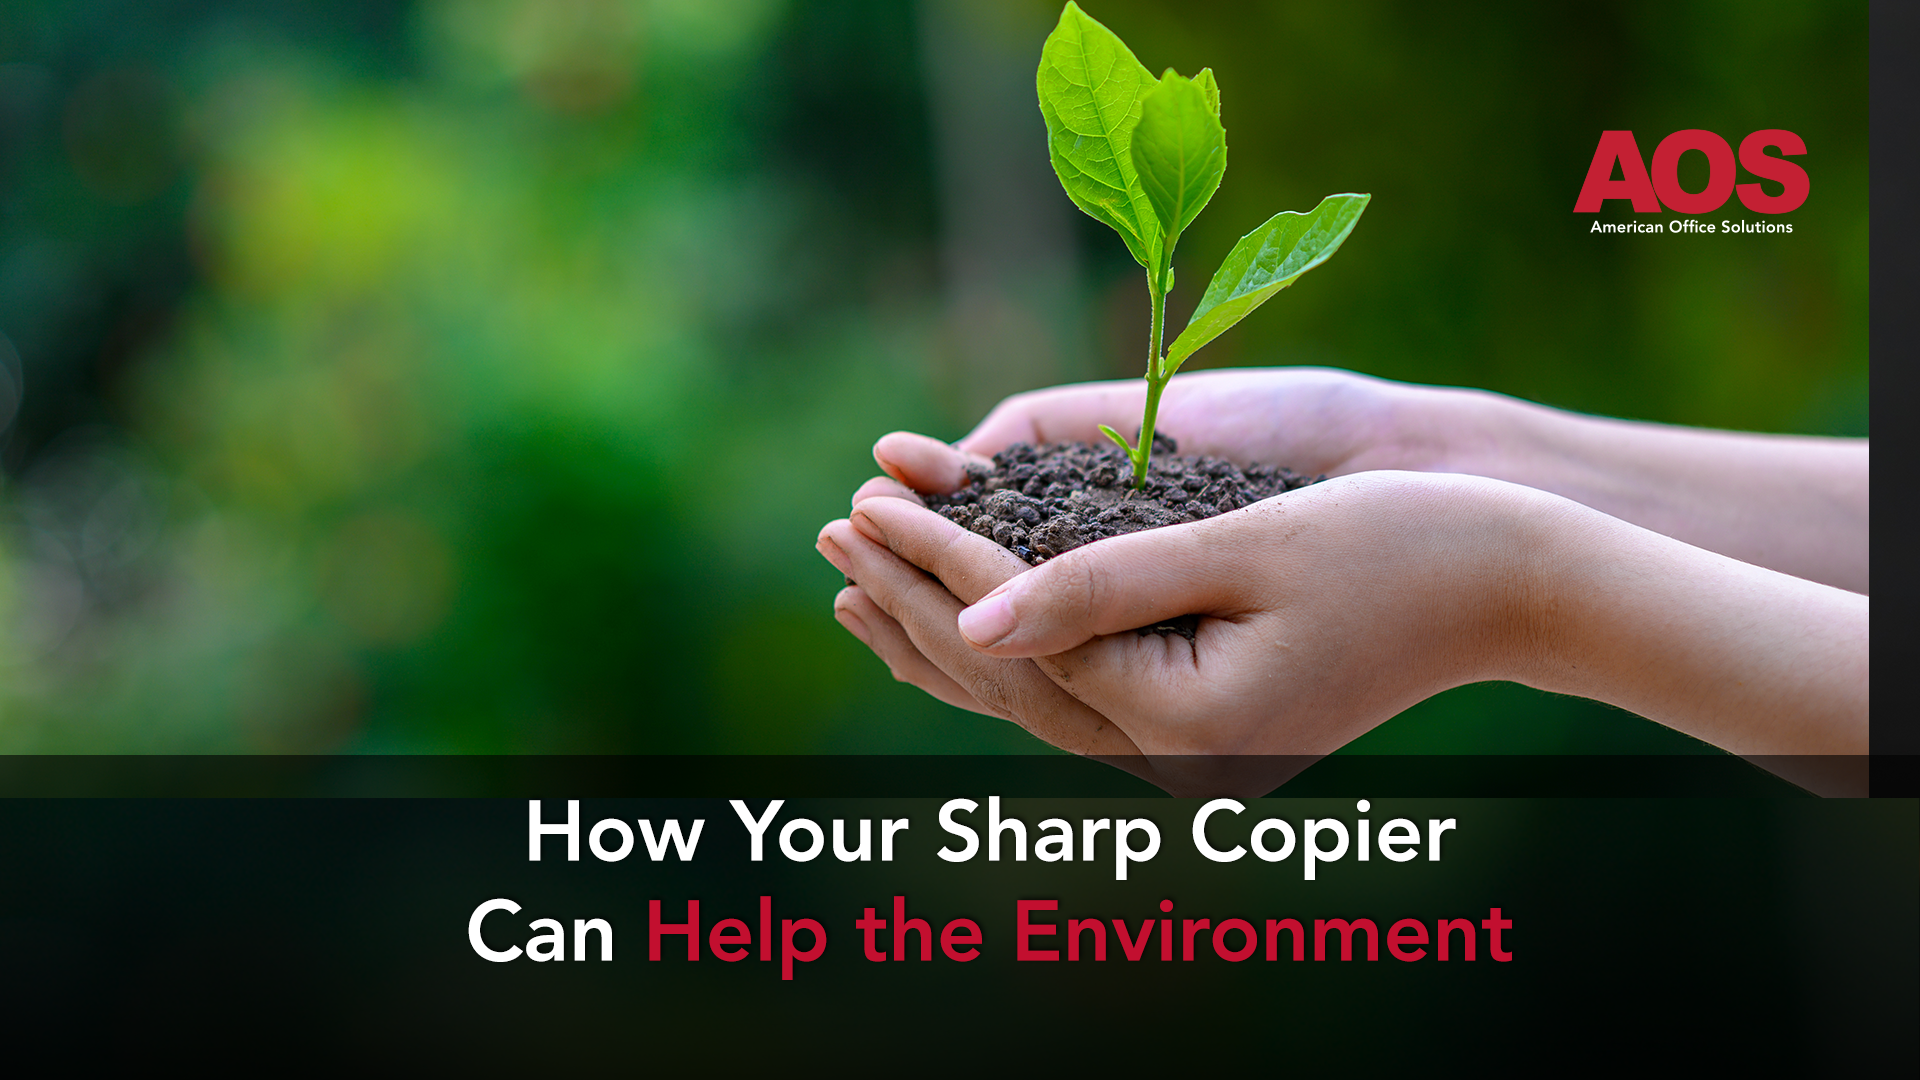 How Your Sharp Copier Can Help the Environment